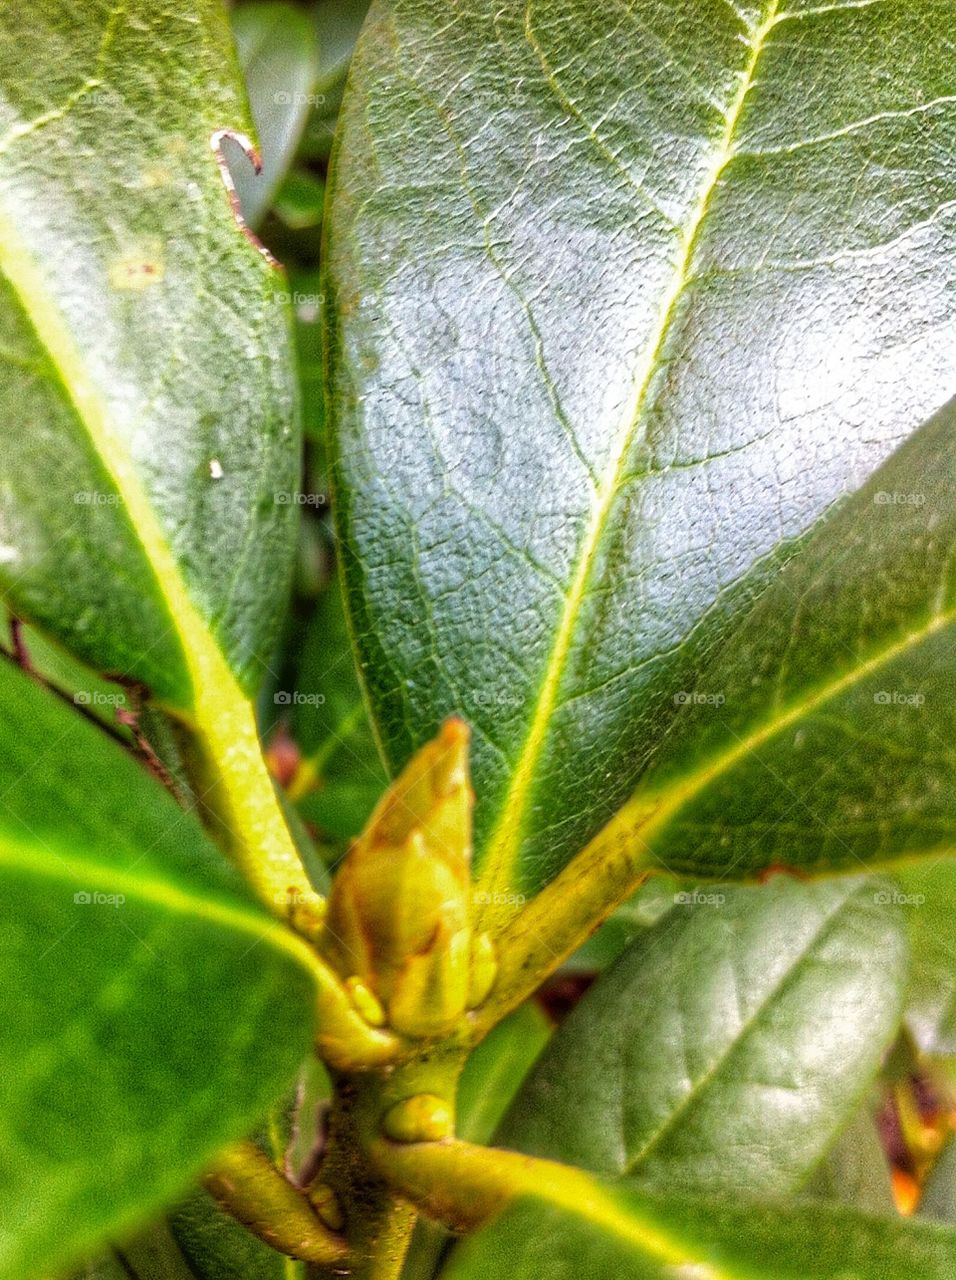 Leaves and buds close up